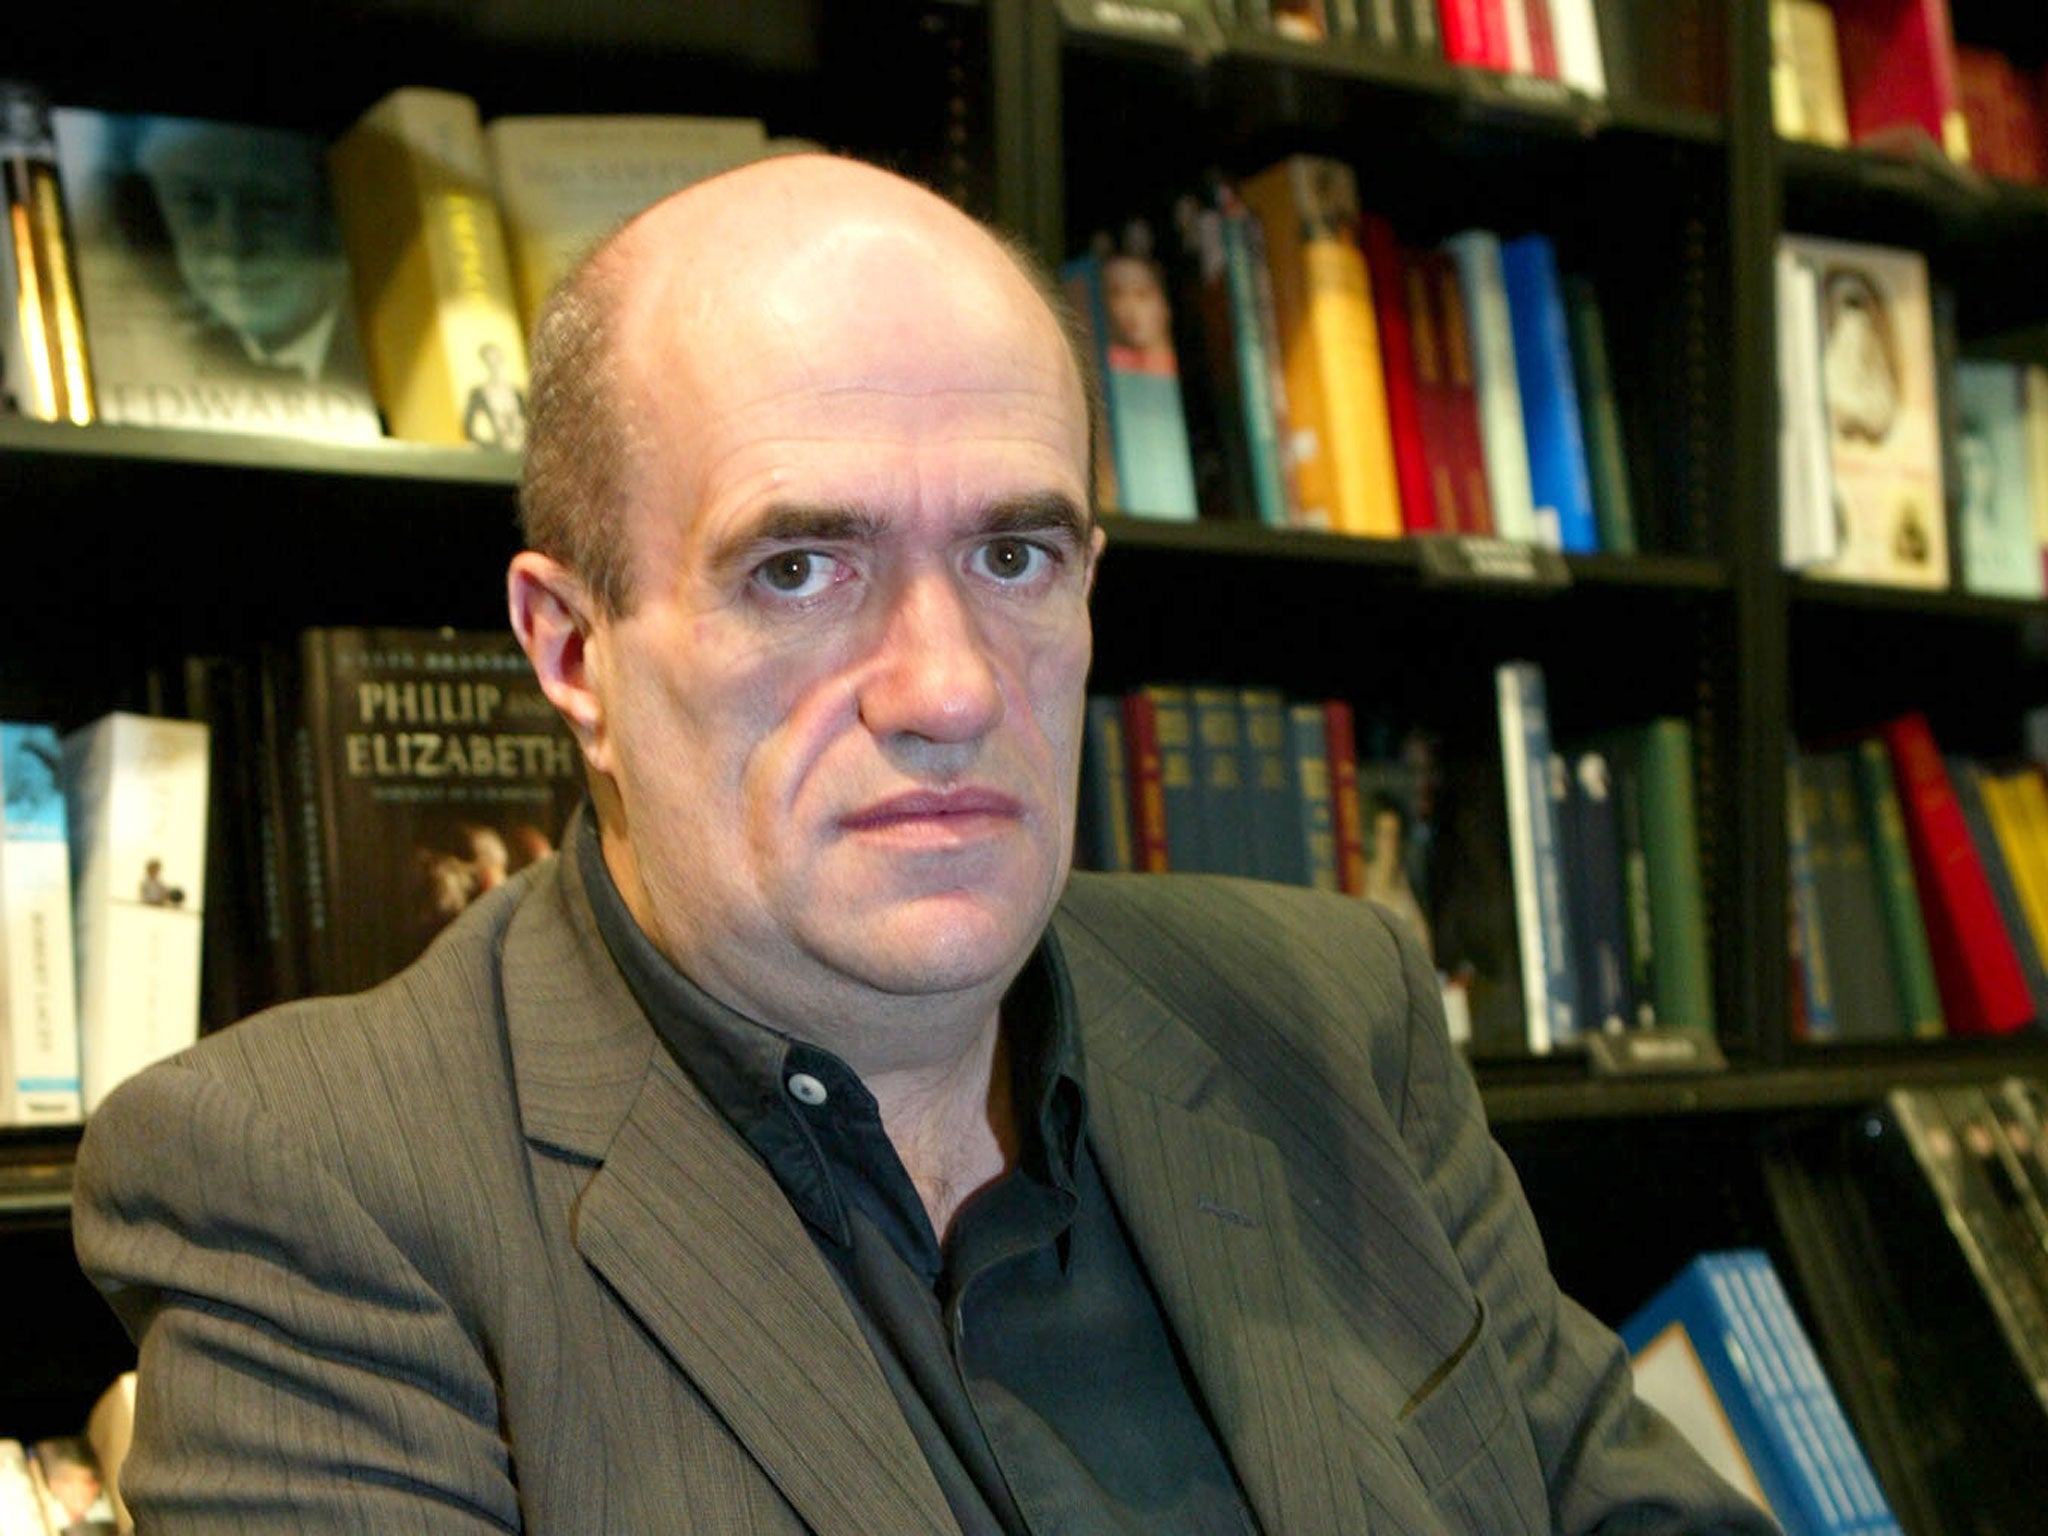 Toibin says: 'When I am stuck, I cross the room and find a poem, any poem, and that gets me started again'